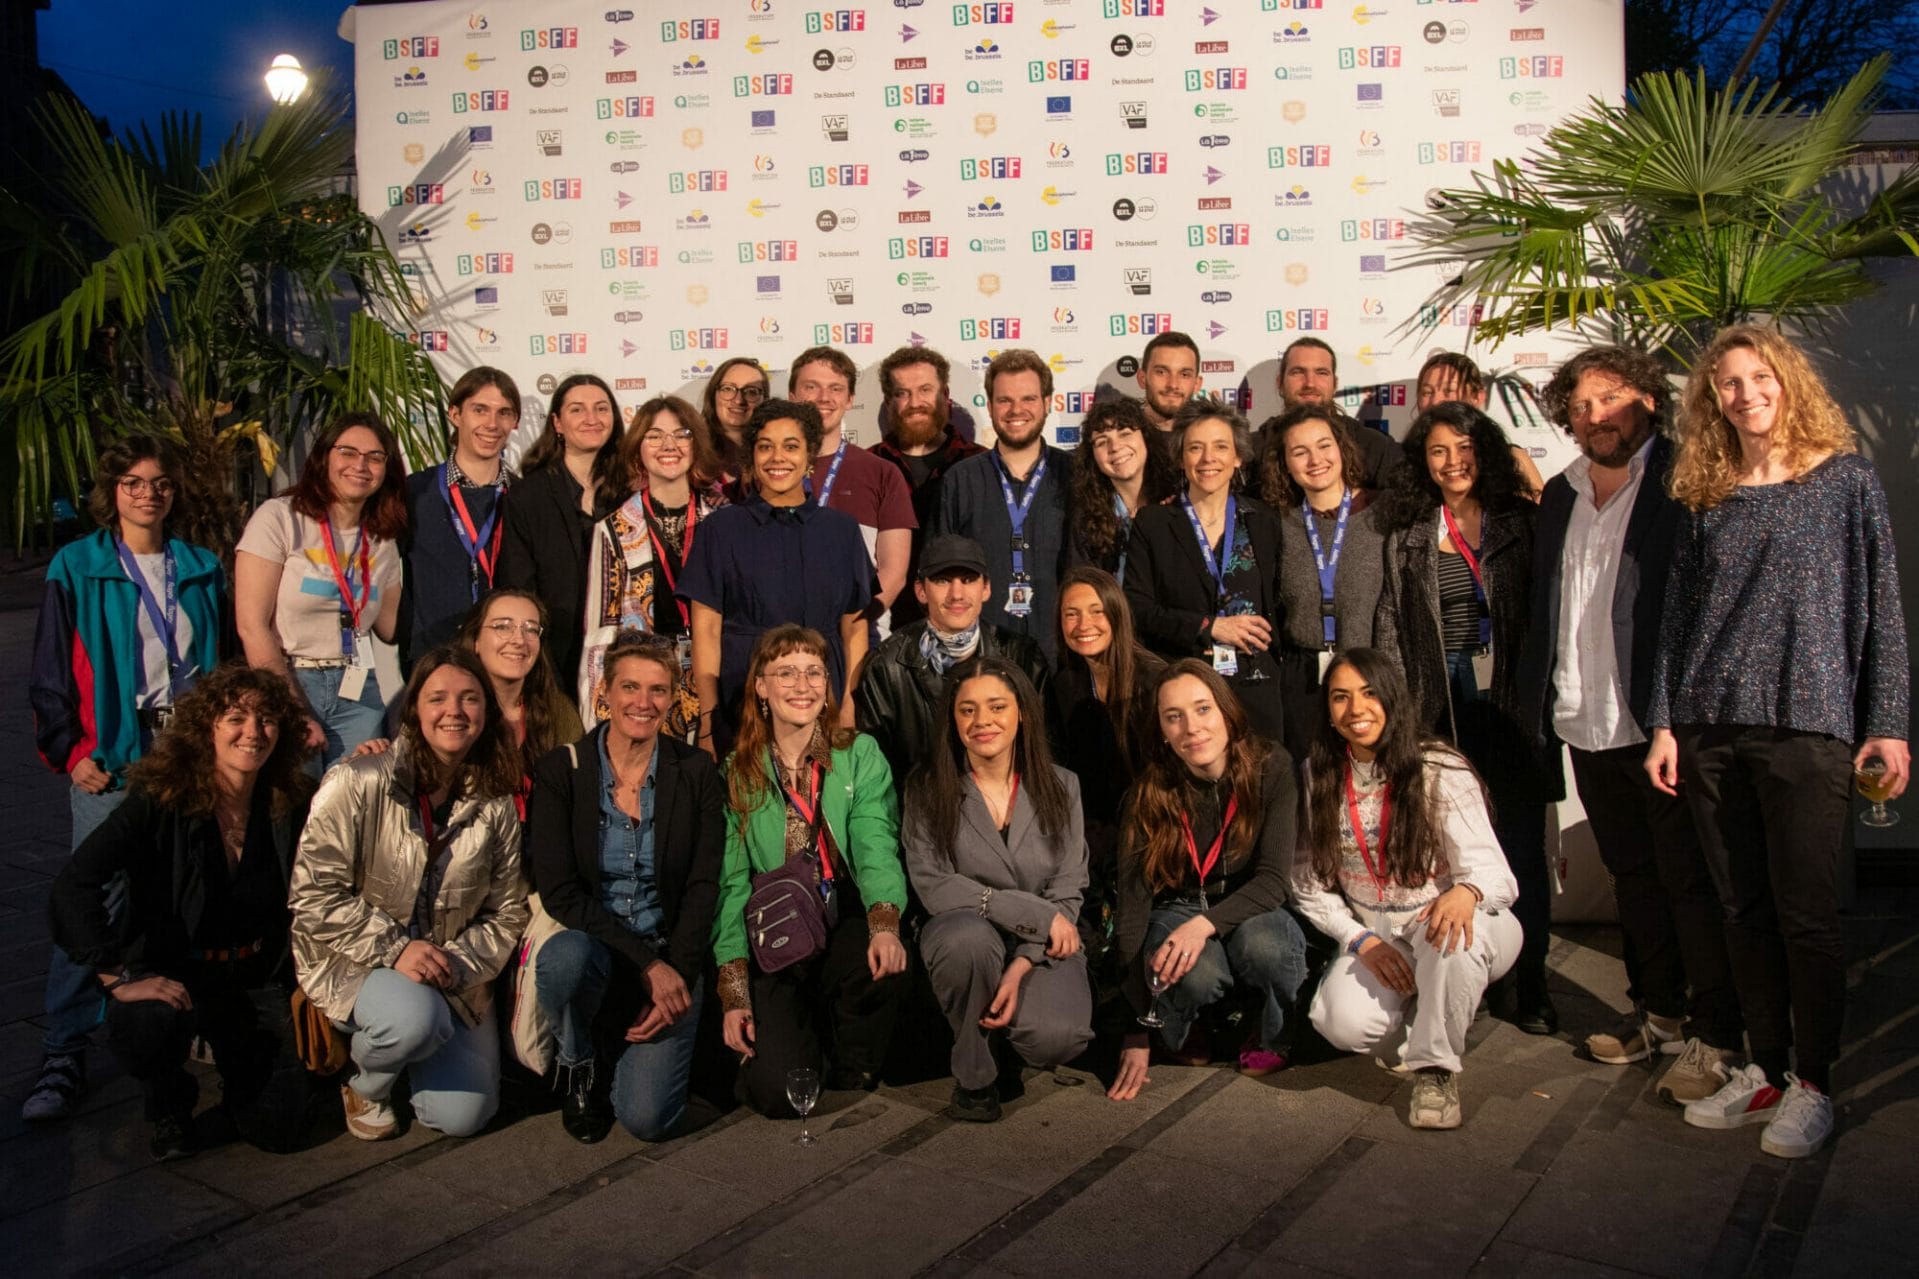 BSFF 2023 - Day 11 - Closing Ceremony - The BSFF 2023 Team